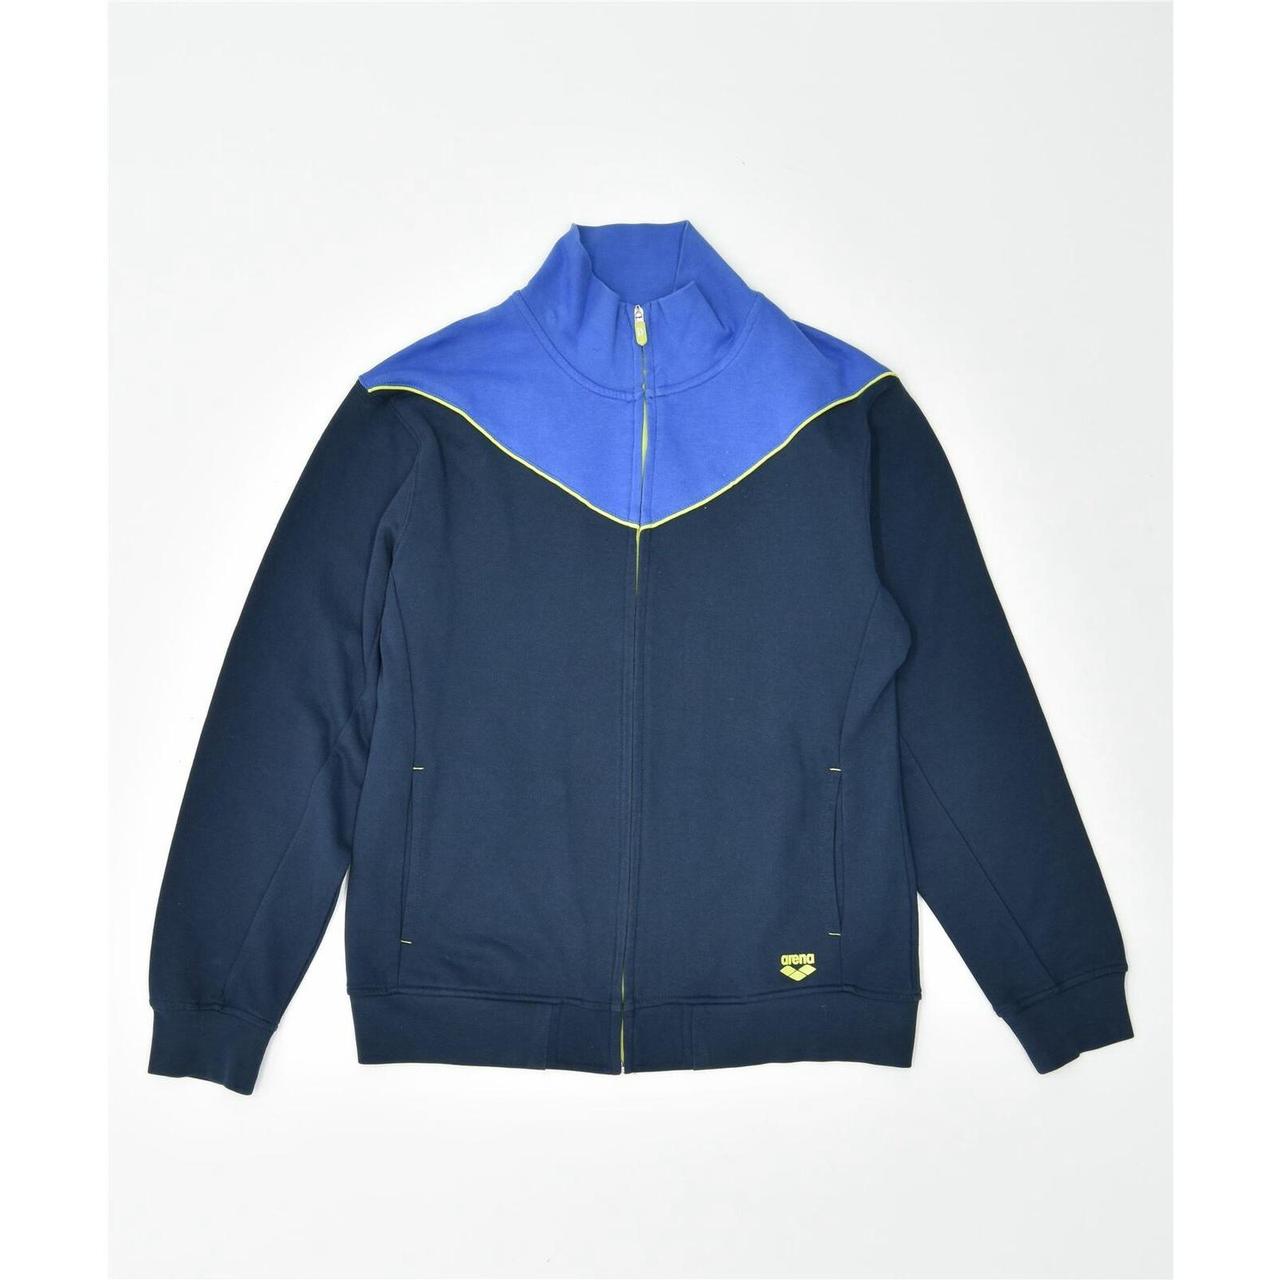 Product Image 1 - ARENA Womens Tracksuit Top Jacket